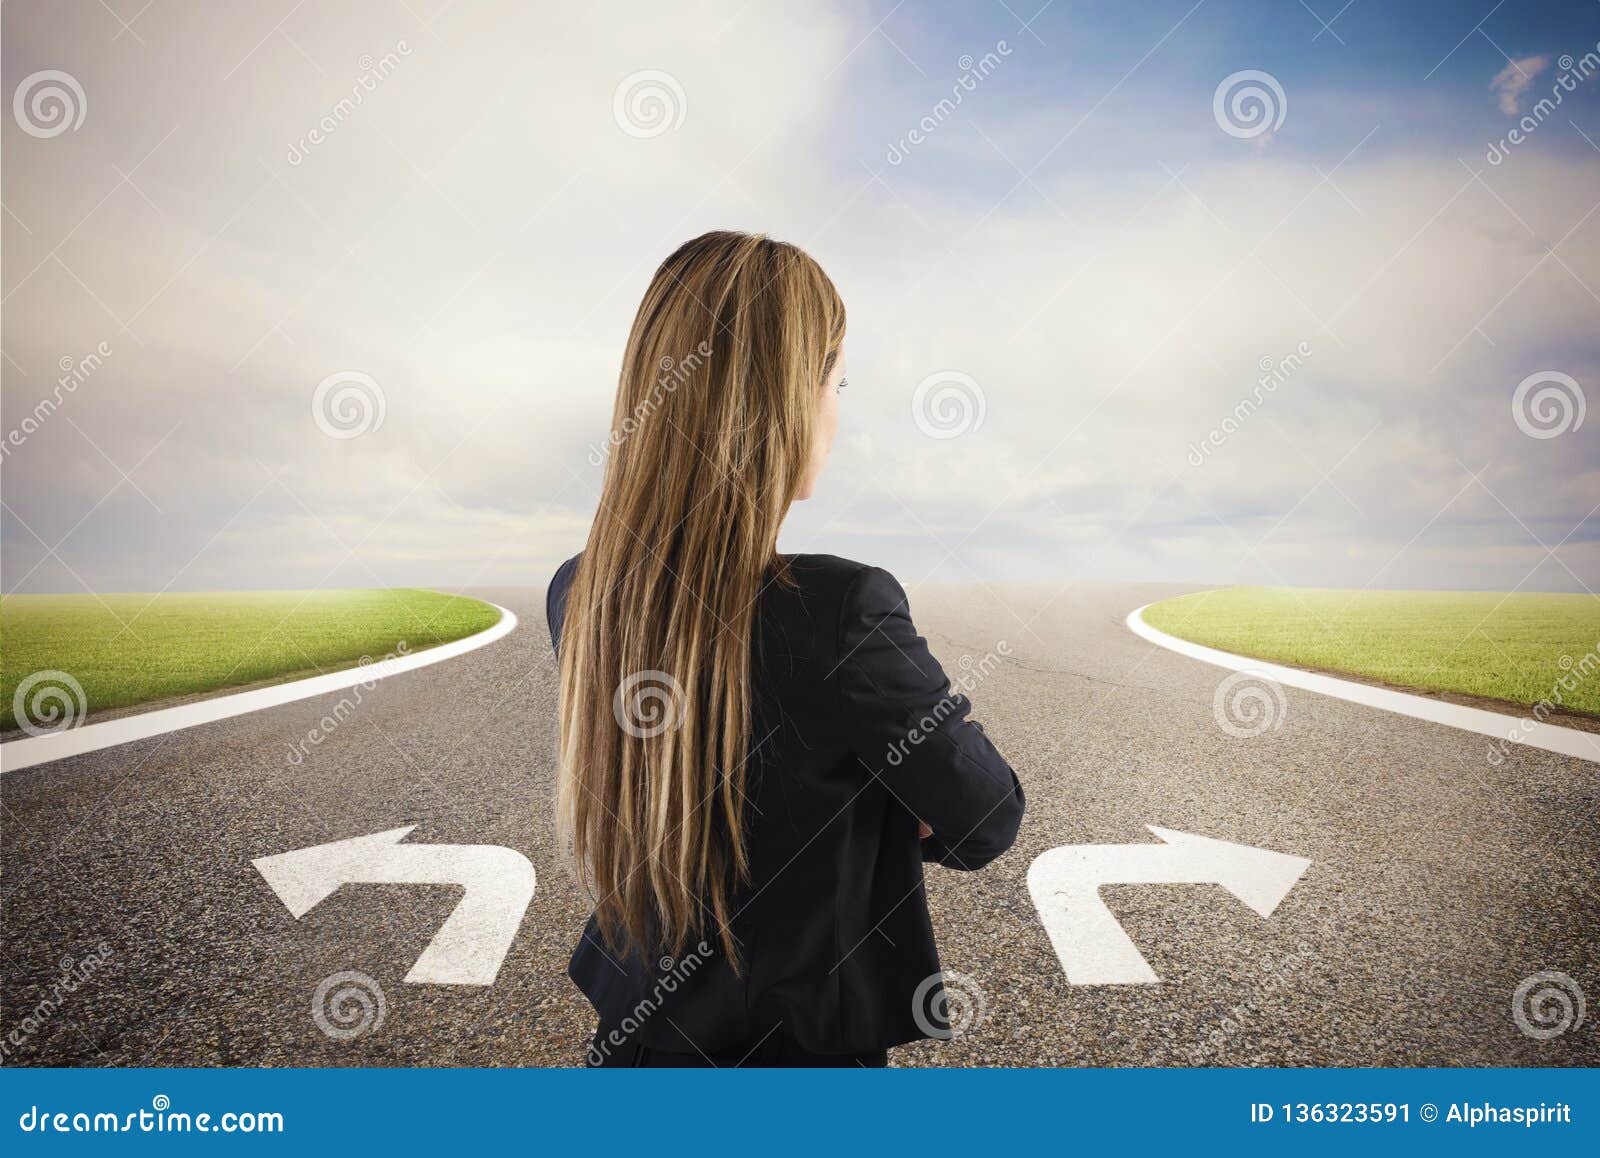 businesswoman at a crossroads. she chooses the correct way. concept of decision in business